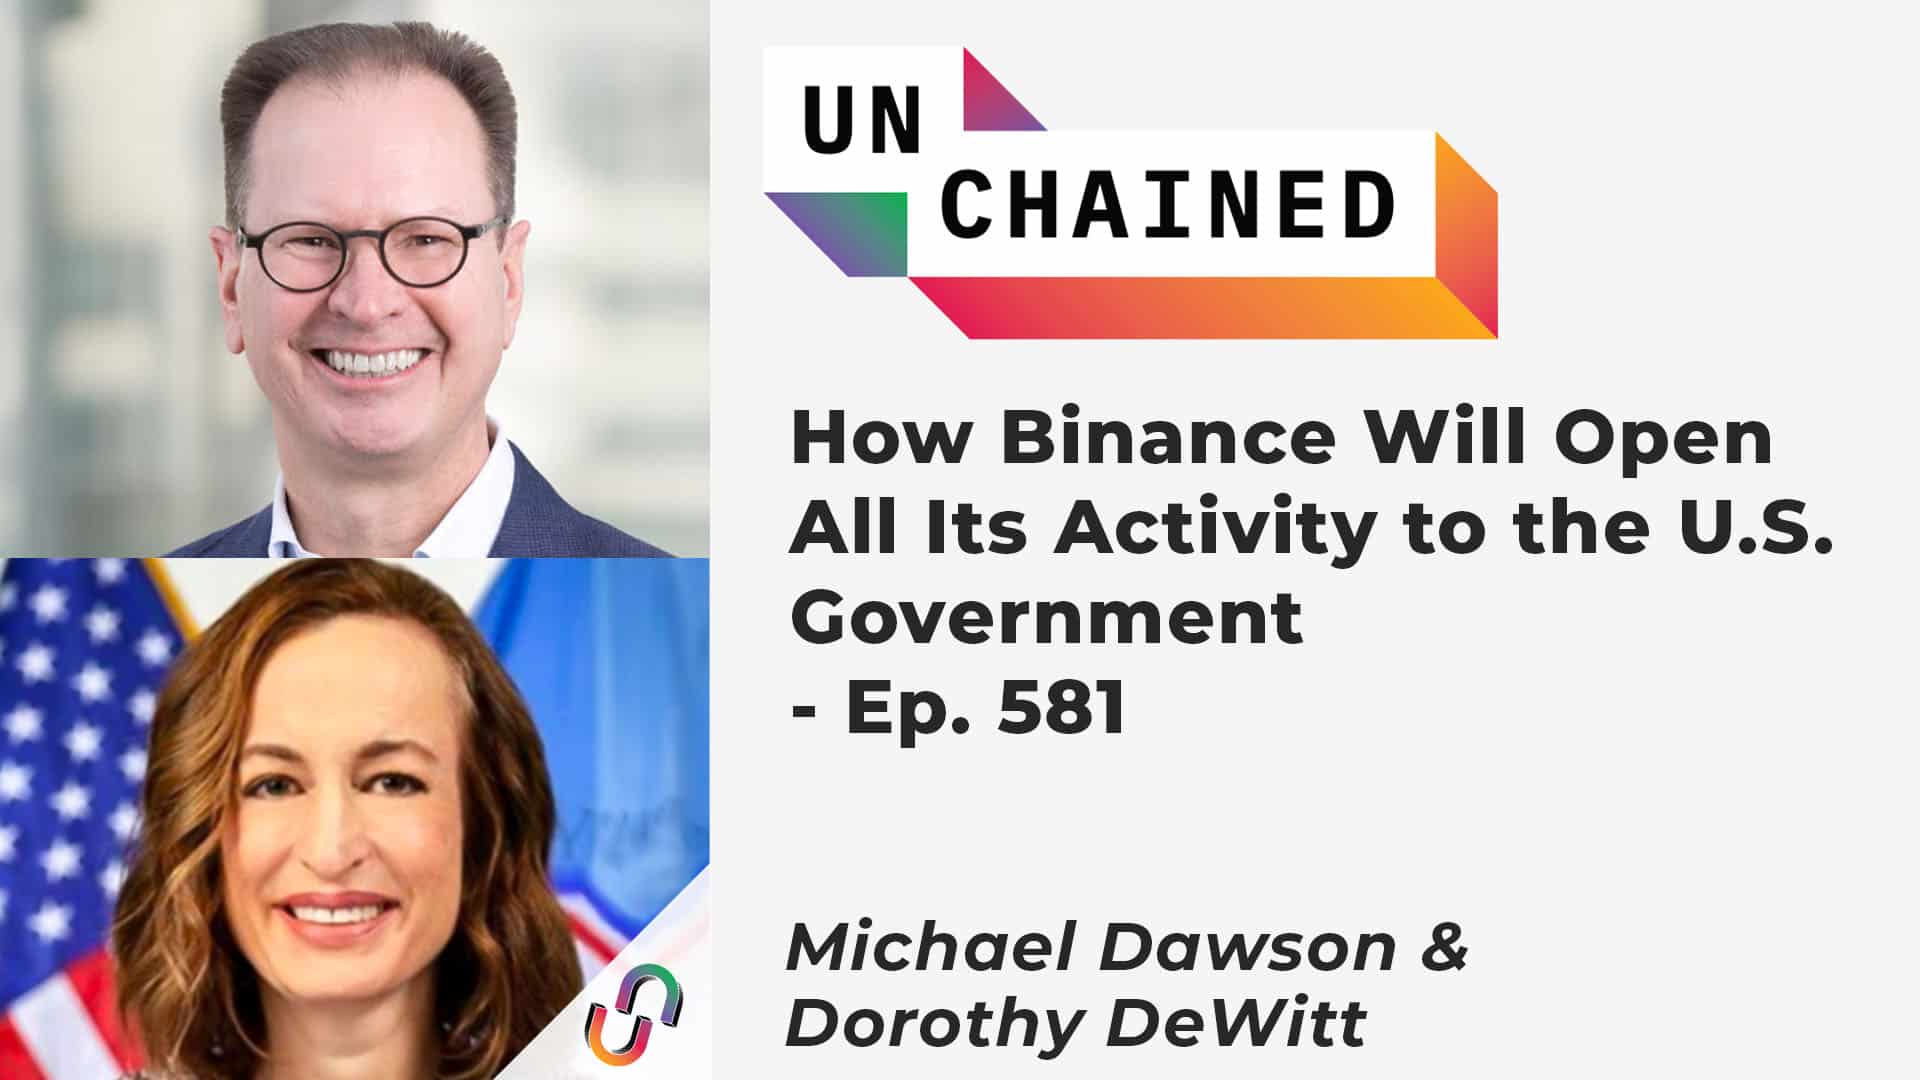 How Binance Will Open All Its Activity to the U.S. Government - Ep. 581